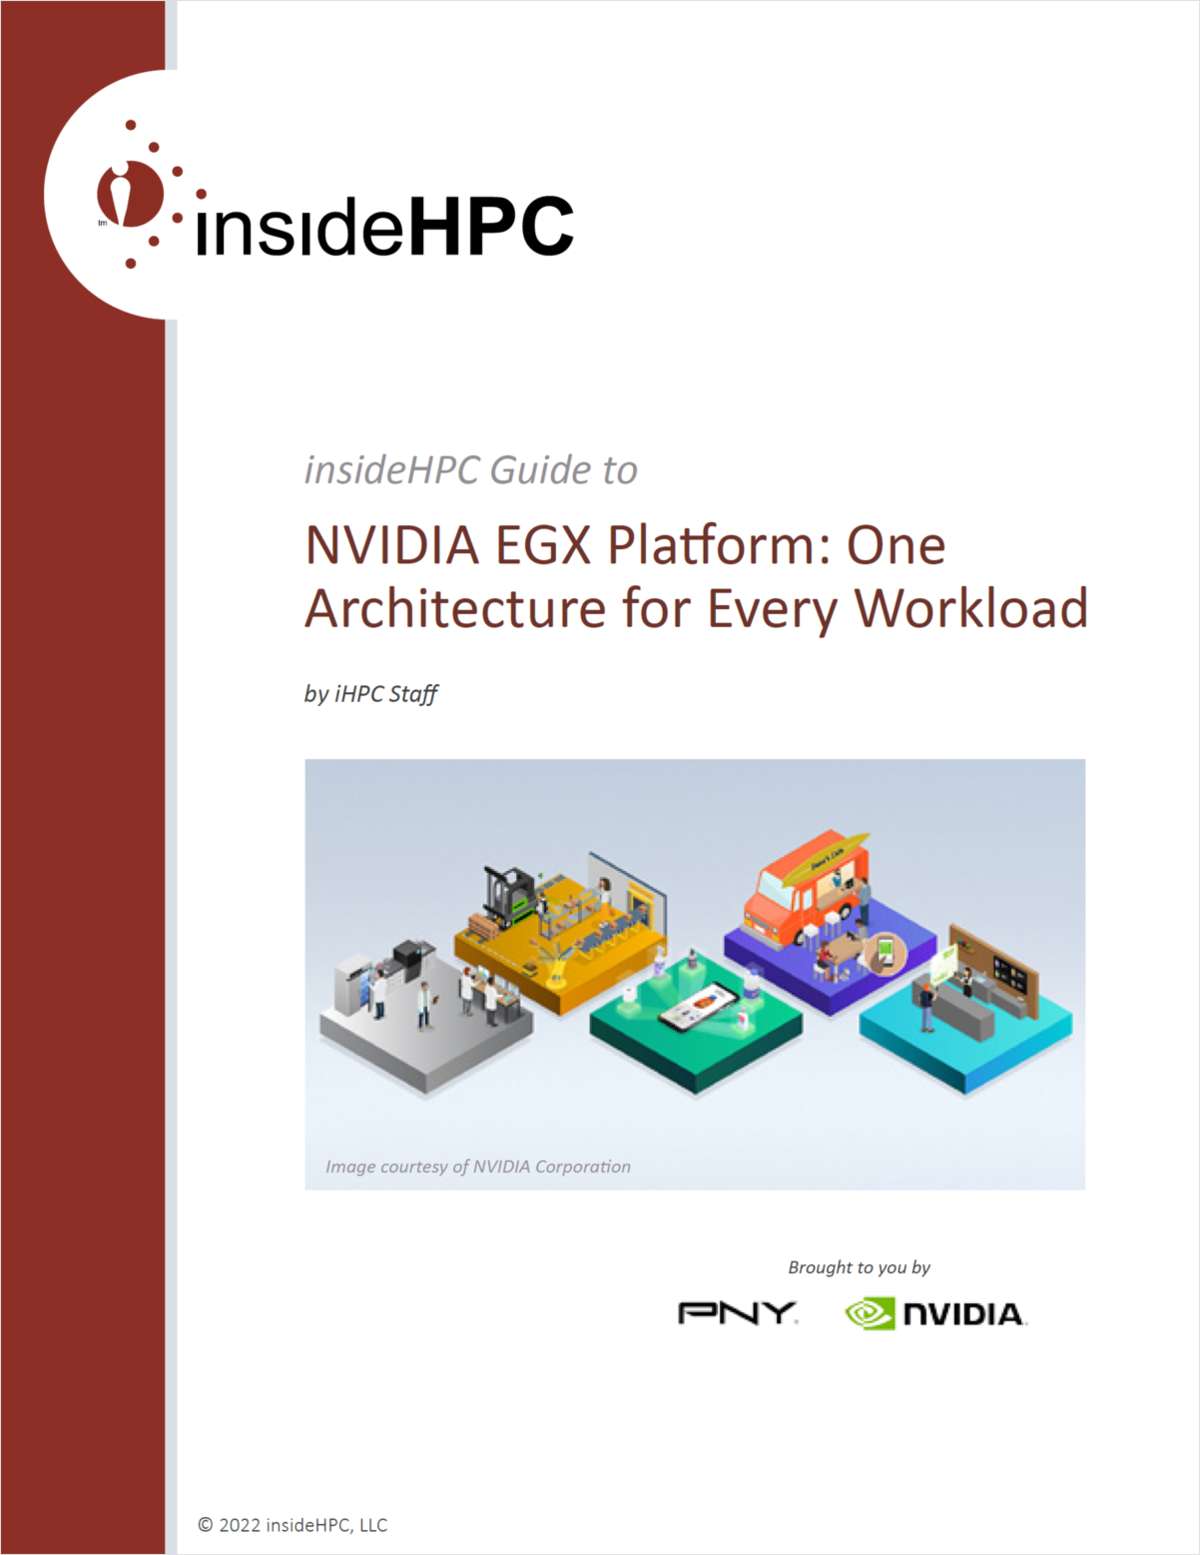 insideHPC Guide to NVIDIA EGX Platform: One Architecture for Every Workload